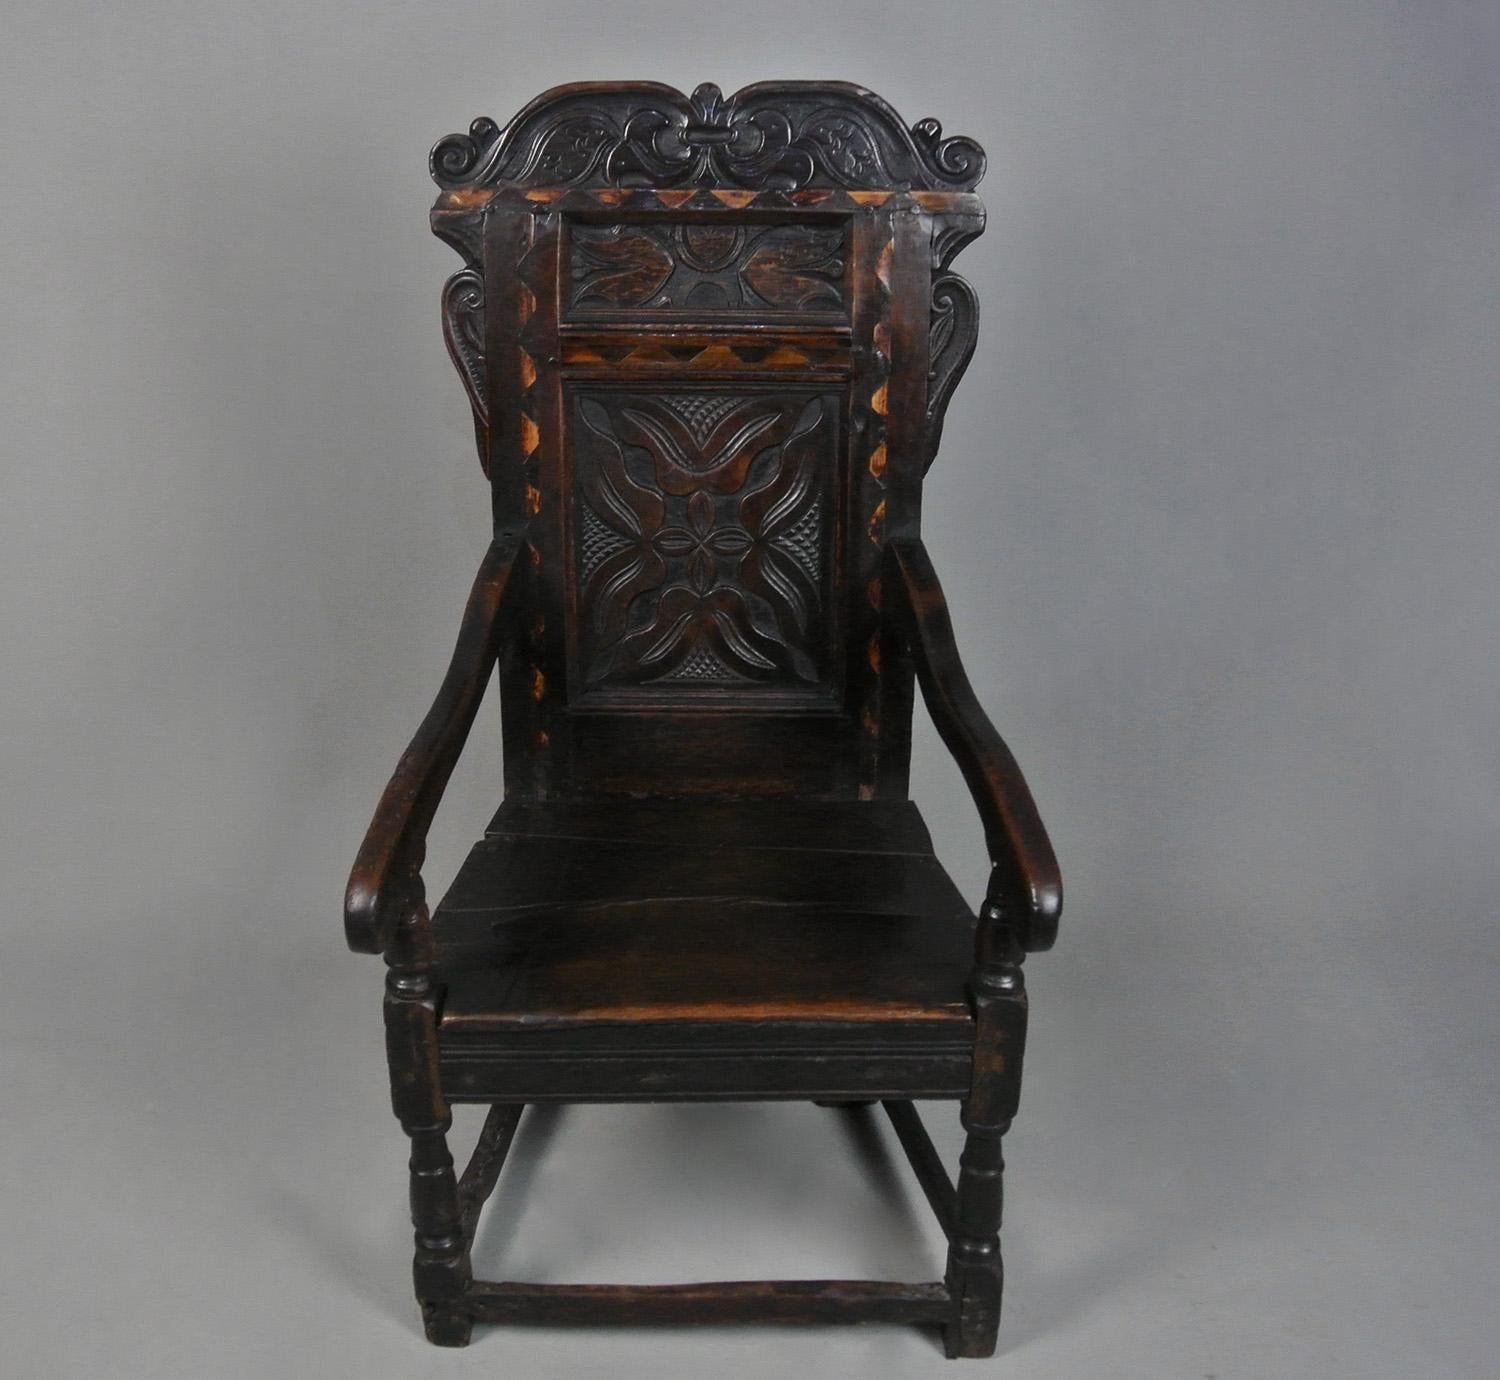 A very fine mid 17th Century oak wainscot ‘Great Chair’ made by a skilled hand and probably from  the Leeds area with a beautiful naturally developed rich colour to the oak, good patination, pegged joints and well carved crest rail and ears.
  
The